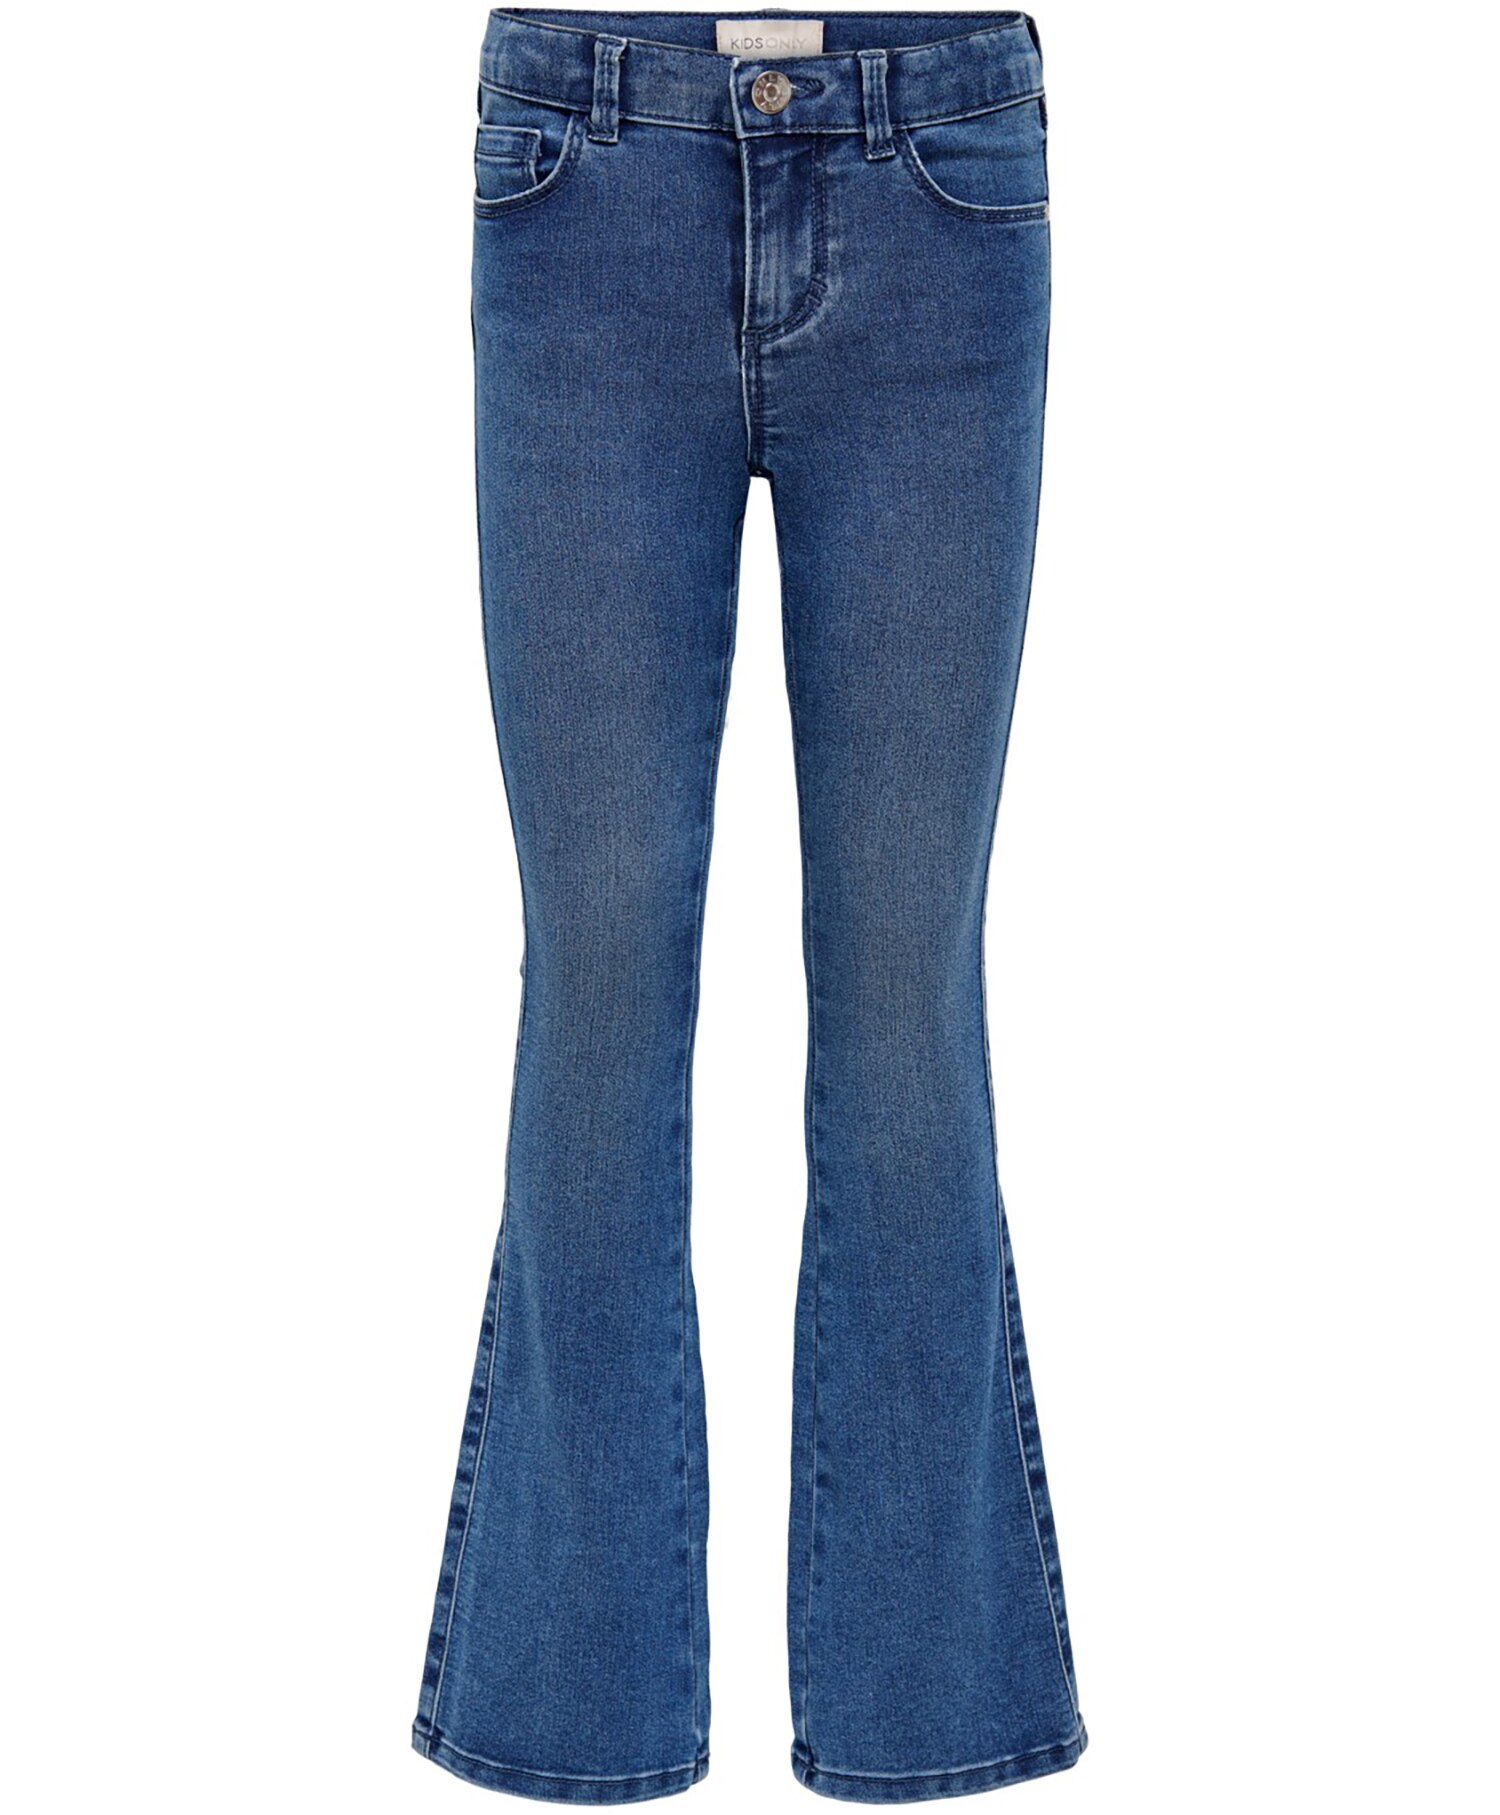 Only KIDS Flared Jeans